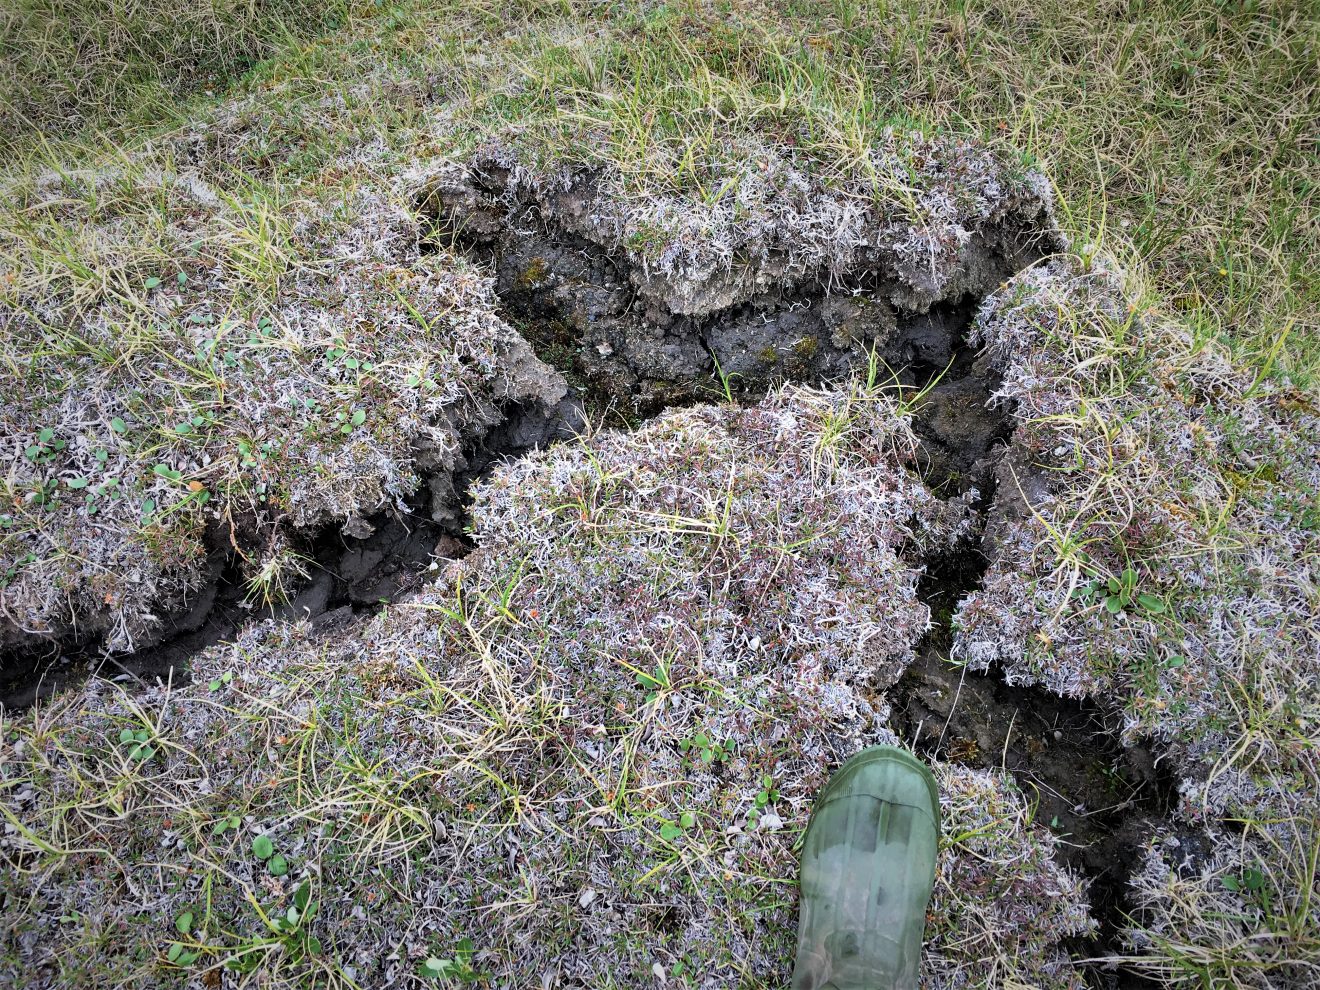 Water pools in recently formed depressions caused by the thawing of ice-rich permafrost in ice-wedge polygon tundra, Deadhorse, Alaska. July 2019. Anna Liljedahl photo